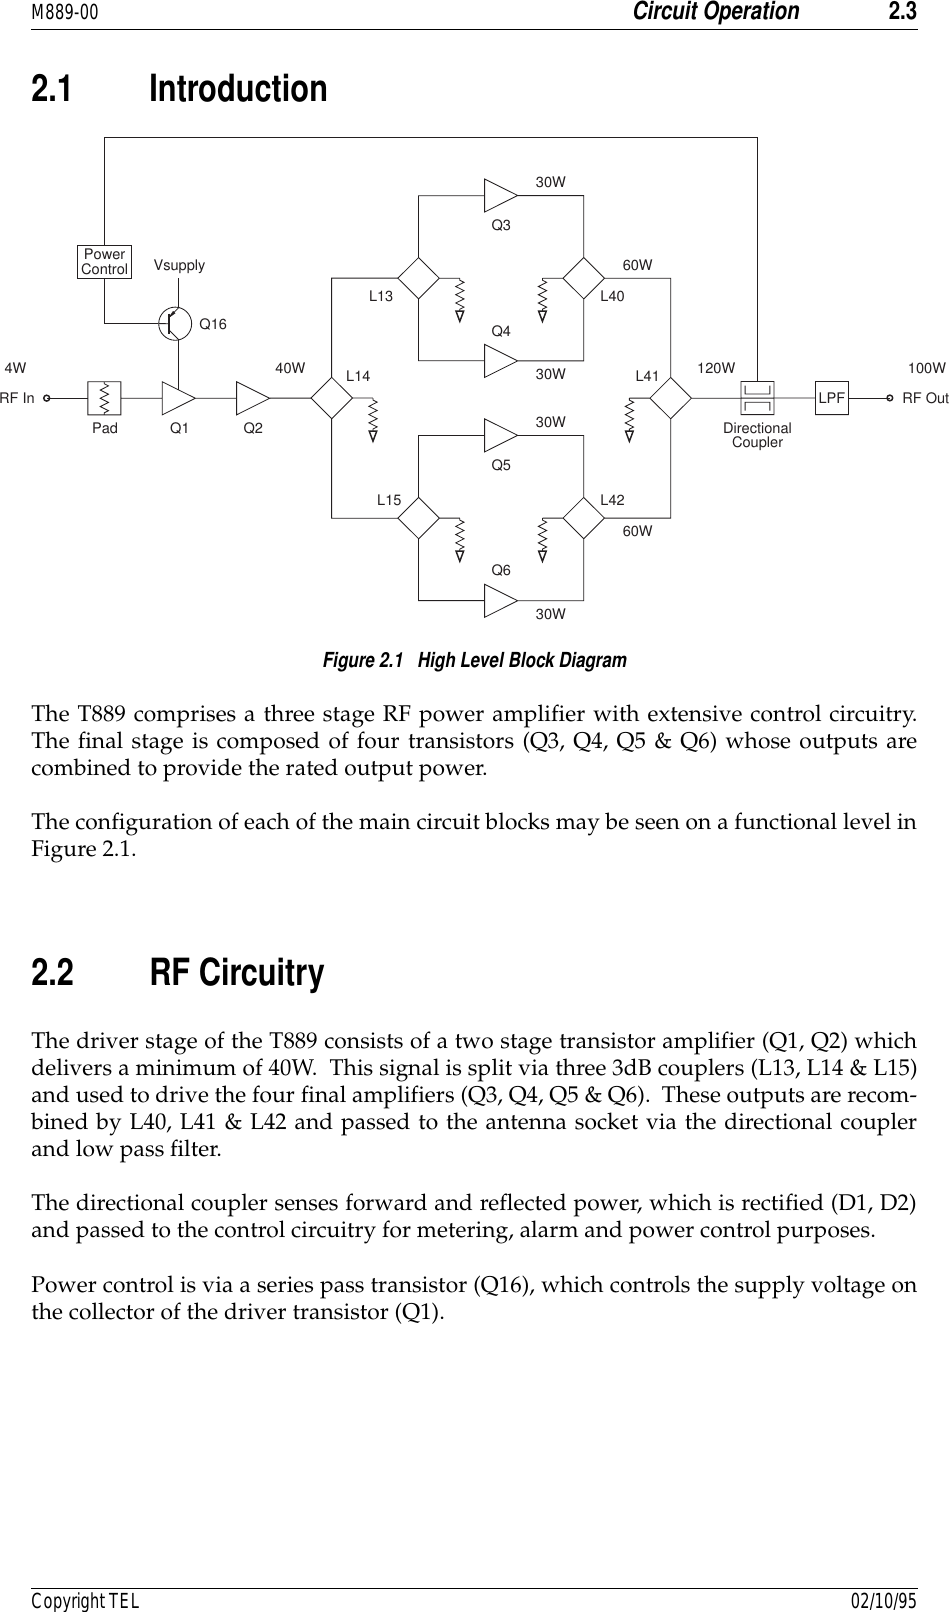 M889-00 Circuit Operation 2.3Copyright TEL 02/10/952.1 IntroductionFigure 2.1   High Level Block DiagramThe T889 comprises a three stage RF power amplifier with extensive control circuitry.The final stage is composed of four transistors (Q3, Q4, Q5 &amp; Q6) whose outputs arecombined to provide the rated output power.The configuration of each of the main circuit blocks may be seen on a functional level inFigure 2.1.2.2 RF CircuitryThe driver stage of the T889 consists of a two stage transistor amplifier (Q1, Q2) whichdelivers a minimum of 40W.  This signal is split via three 3dB couplers (L13, L14 &amp; L15)and used to drive the four final amplifiers (Q3, Q4, Q5 &amp; Q6).  These outputs are recom-bined by L40, L41 &amp; L42 and passed to the antenna socket via the directional couplerand low pass filter.The directional coupler senses forward and reflected power, which is rectified (D1, D2)and passed to the control circuitry for metering, alarm and power control purposes.Power control is via a series pass transistor (Q16), which controls the supply voltage onthe collector of the driver transistor (Q1).RF OutQ1 Q2PadRF In LPF4W 40WQ3Q4Q5Q630W30W30W30W60W60W120W 100WPowerControl VsupplyQ16L40L13L15 L42L14 L41DirectionalCoupler